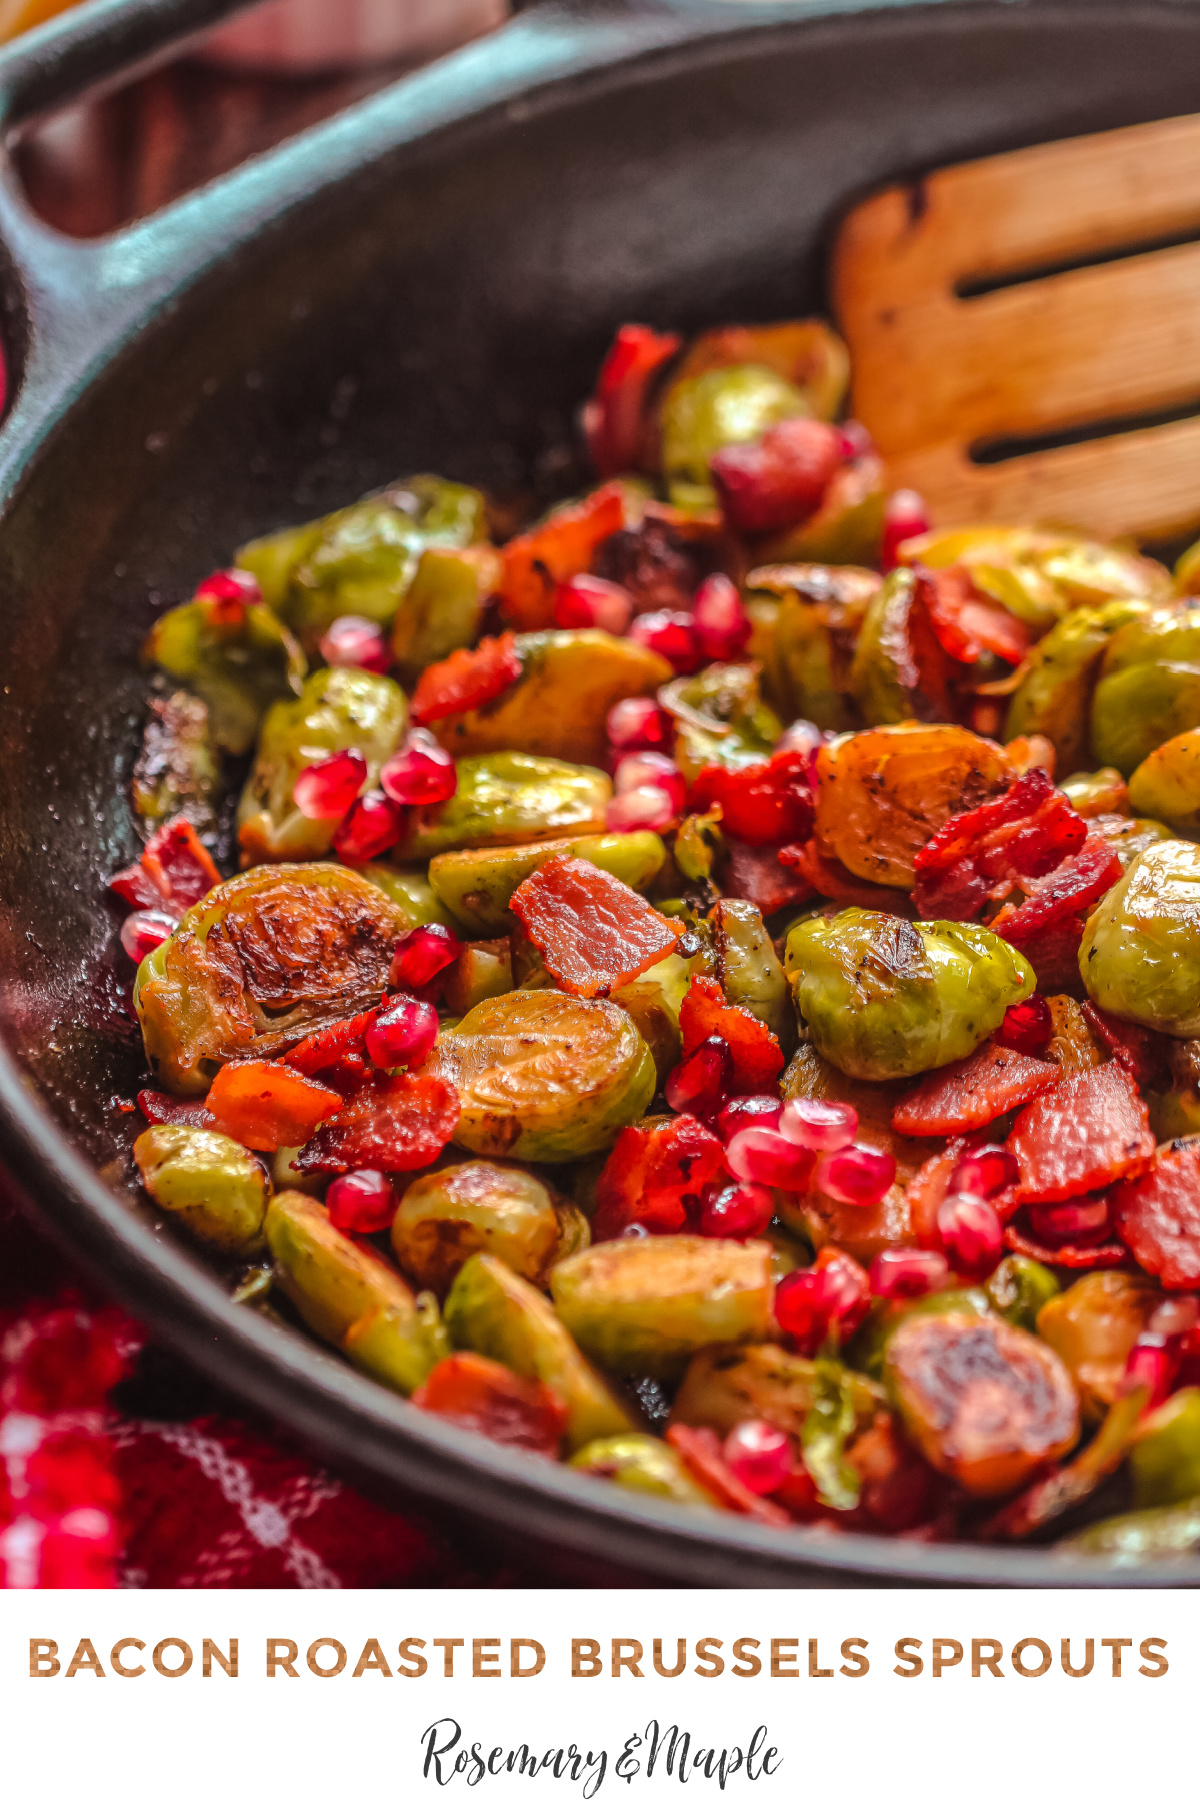 Looking for a festive new side dish? This bacon roasted brussels sprouts recipe is sweet, savory, delicious and perfect for the holidays.